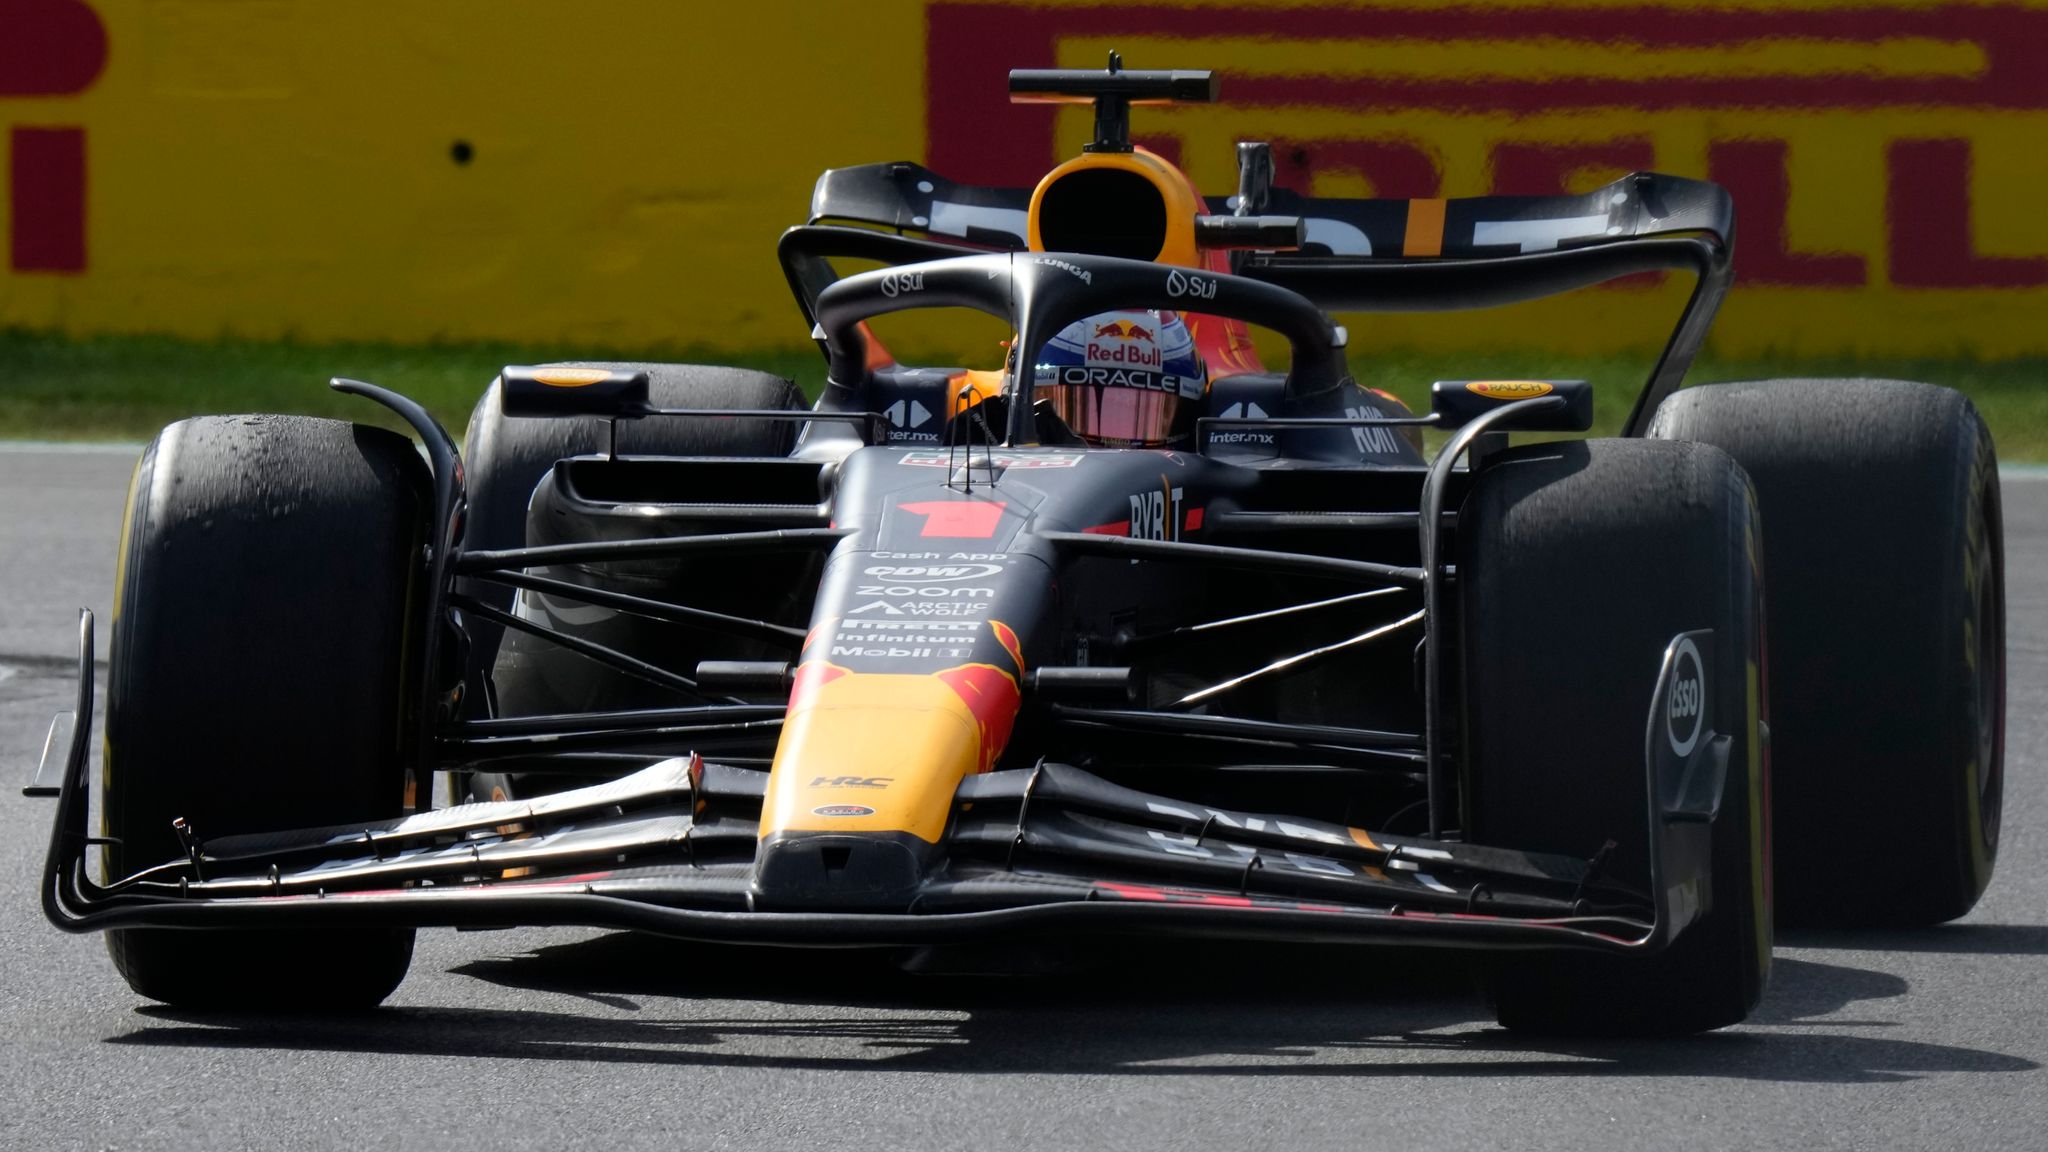 Italian Grand Prix Live updates from practice, qualifying and race at Monza as Max Verstappen seeks record F1 win F1 News Sky Sports